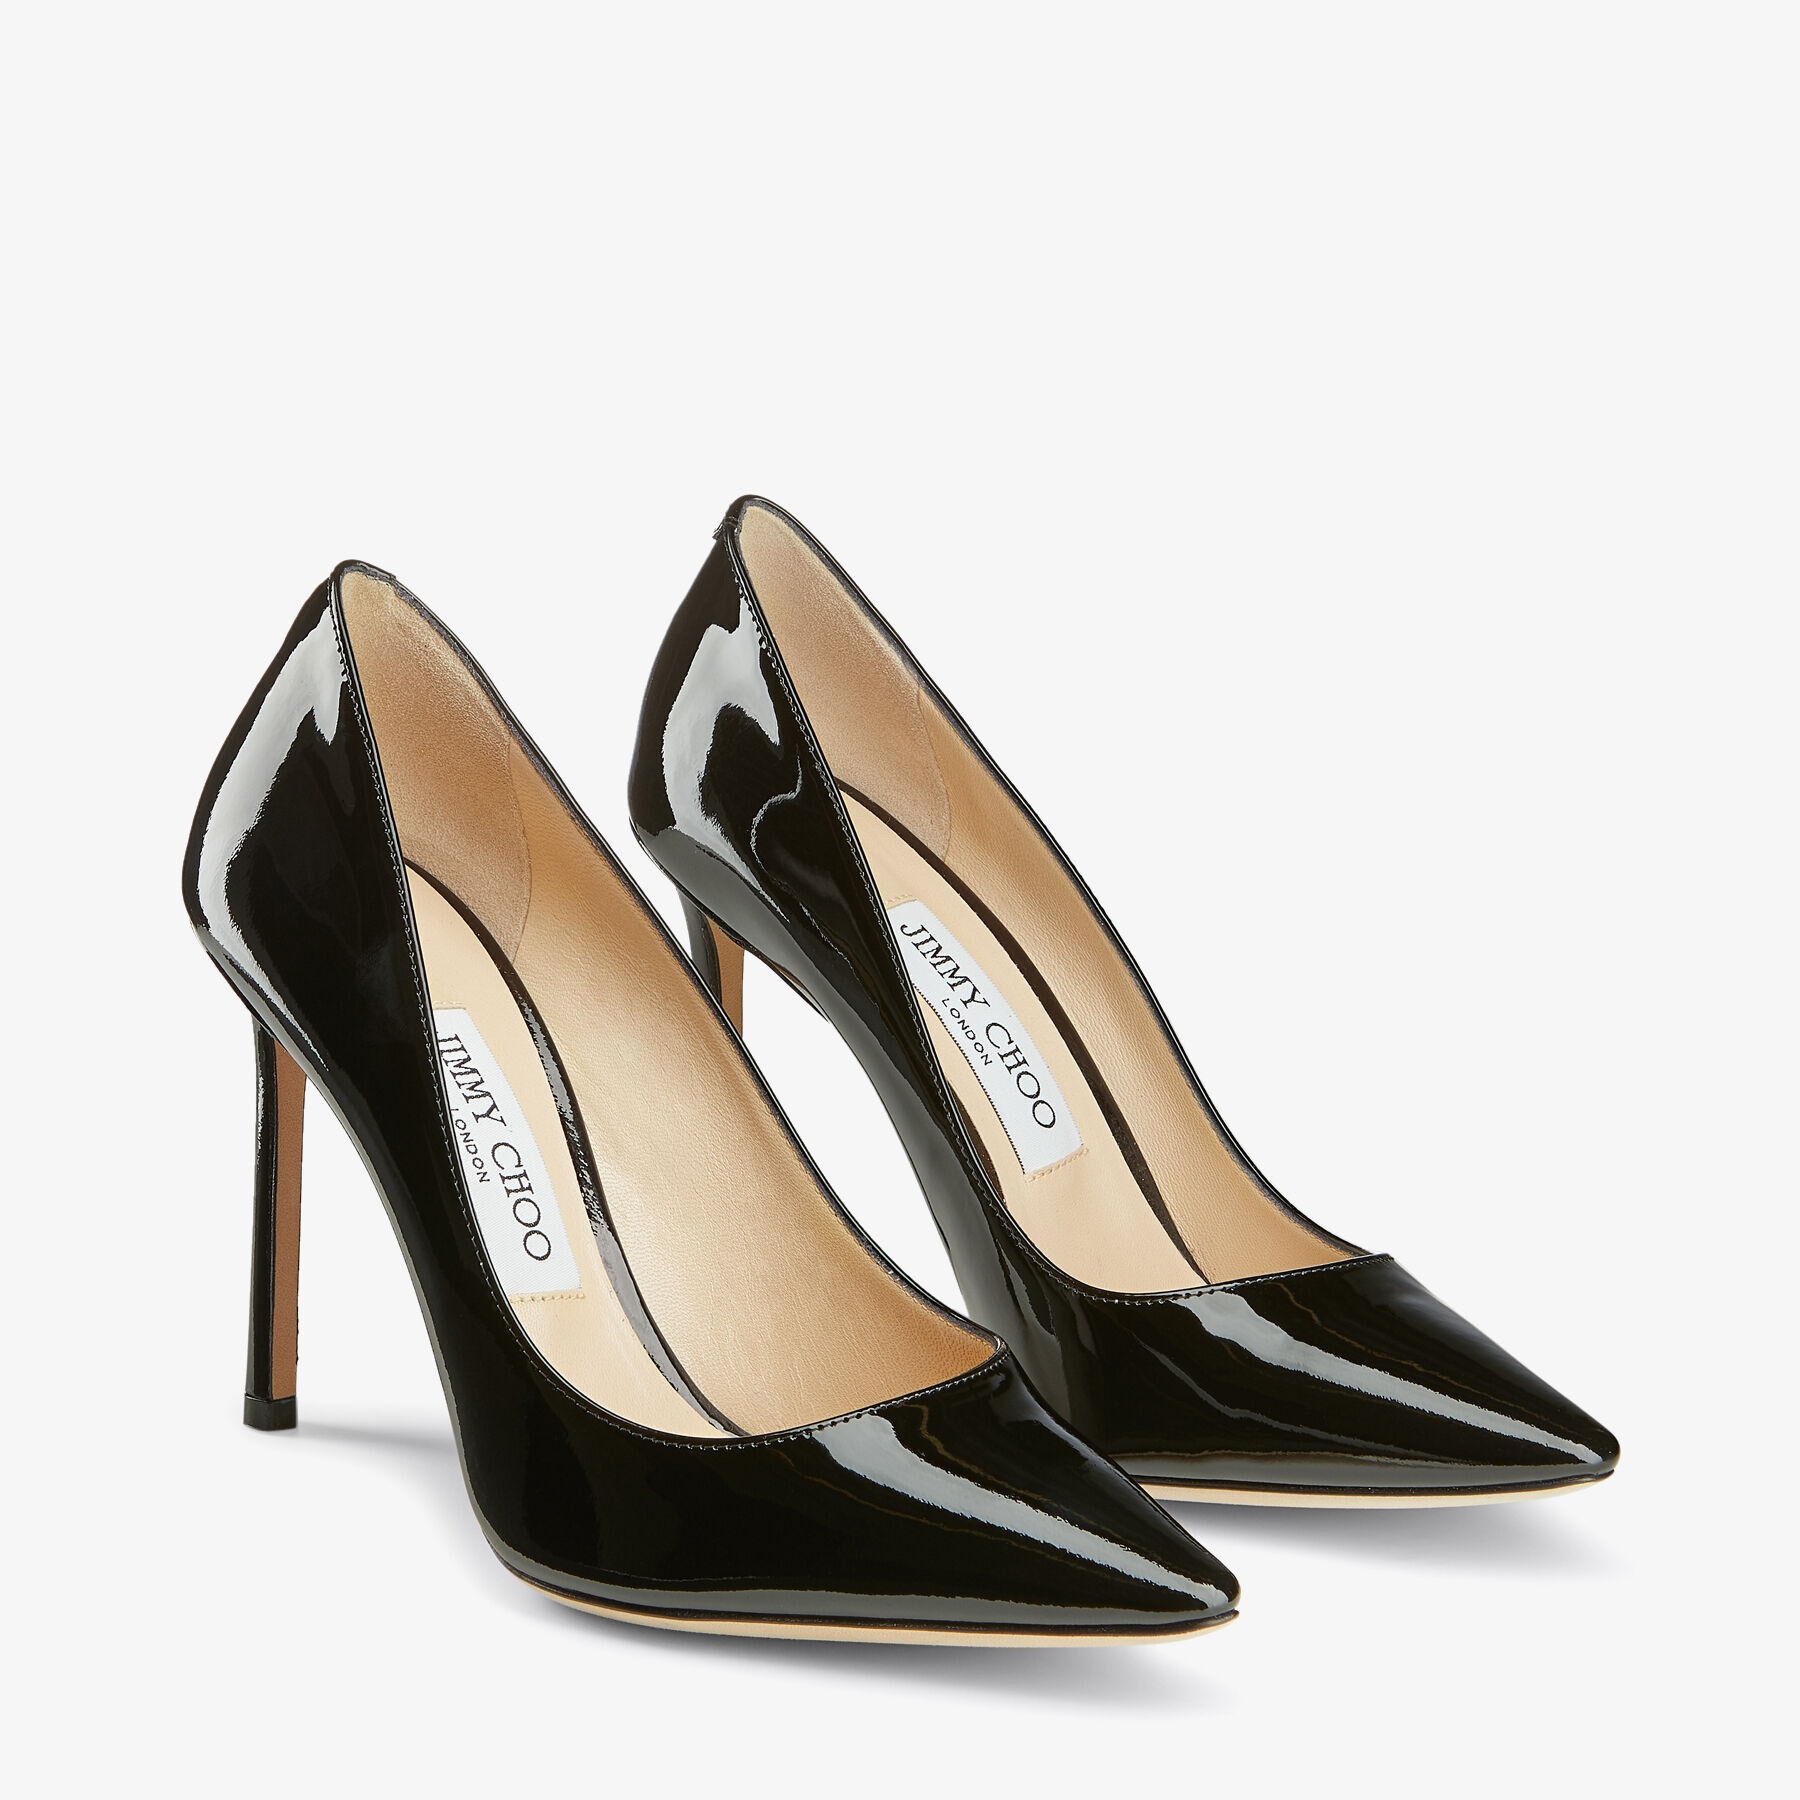 Romy 100
Black Patent Leather Pointy Toe Pumps - 3